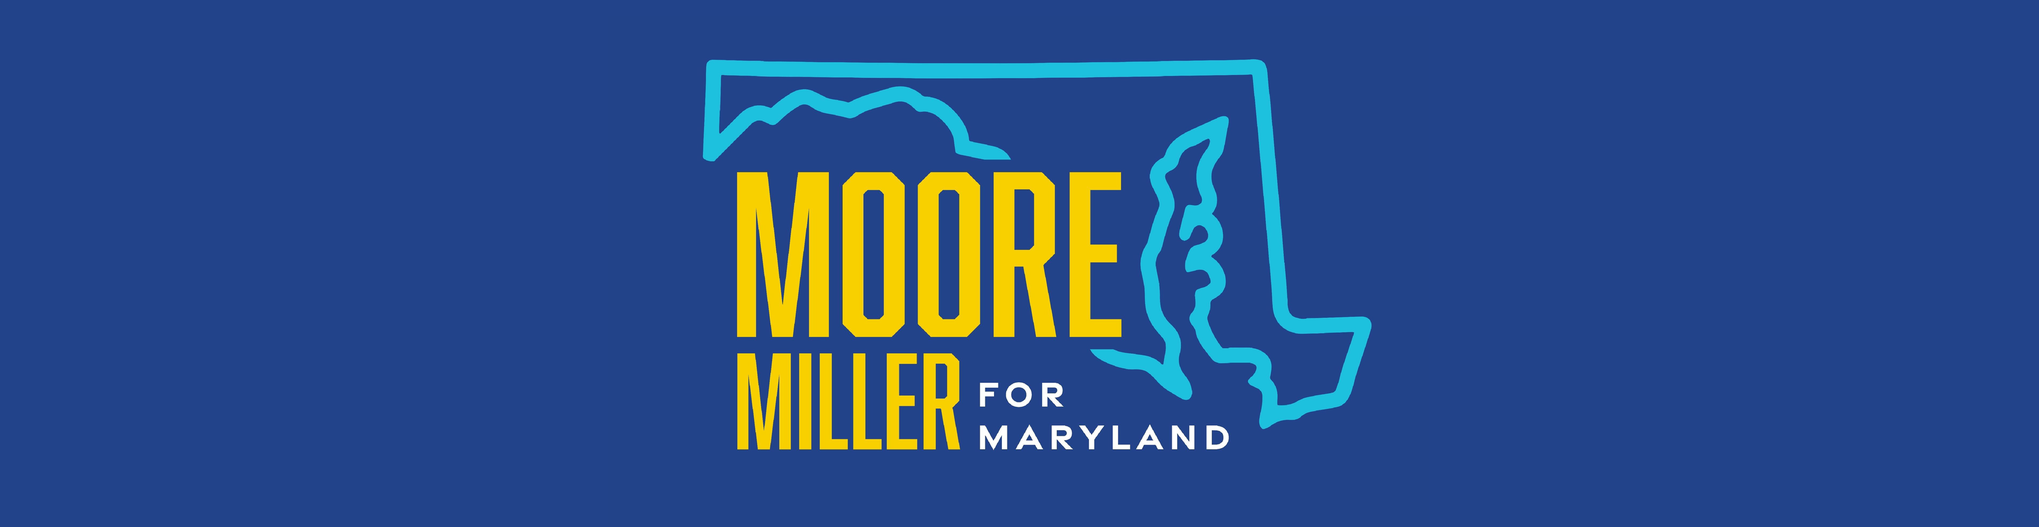 Moore Miller for Maryland